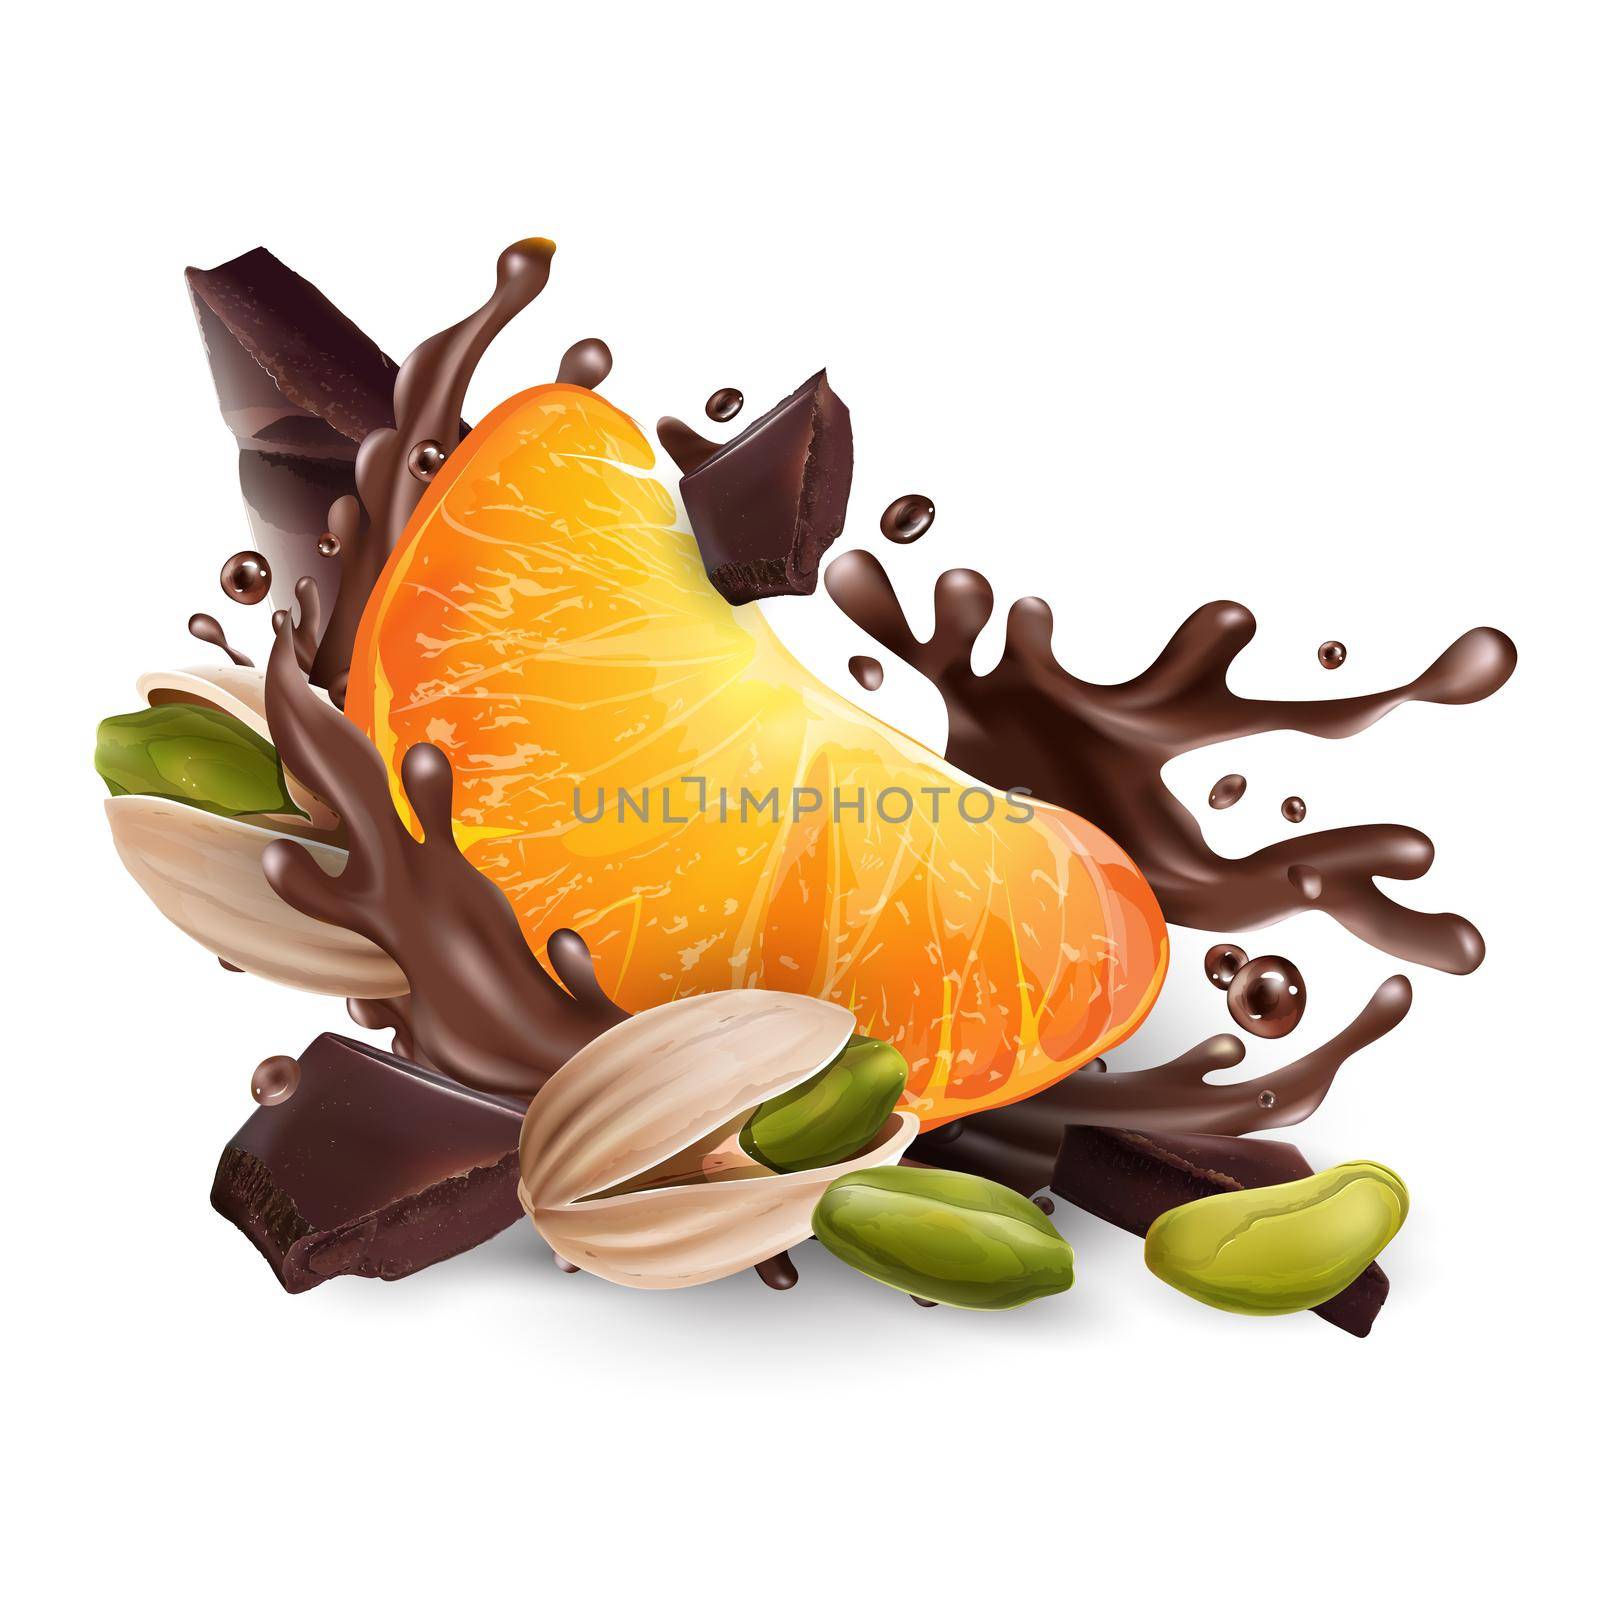 A slice of tangerine with pistachios and chocolate pieces and splashes on a white background. Realistic style illustration.